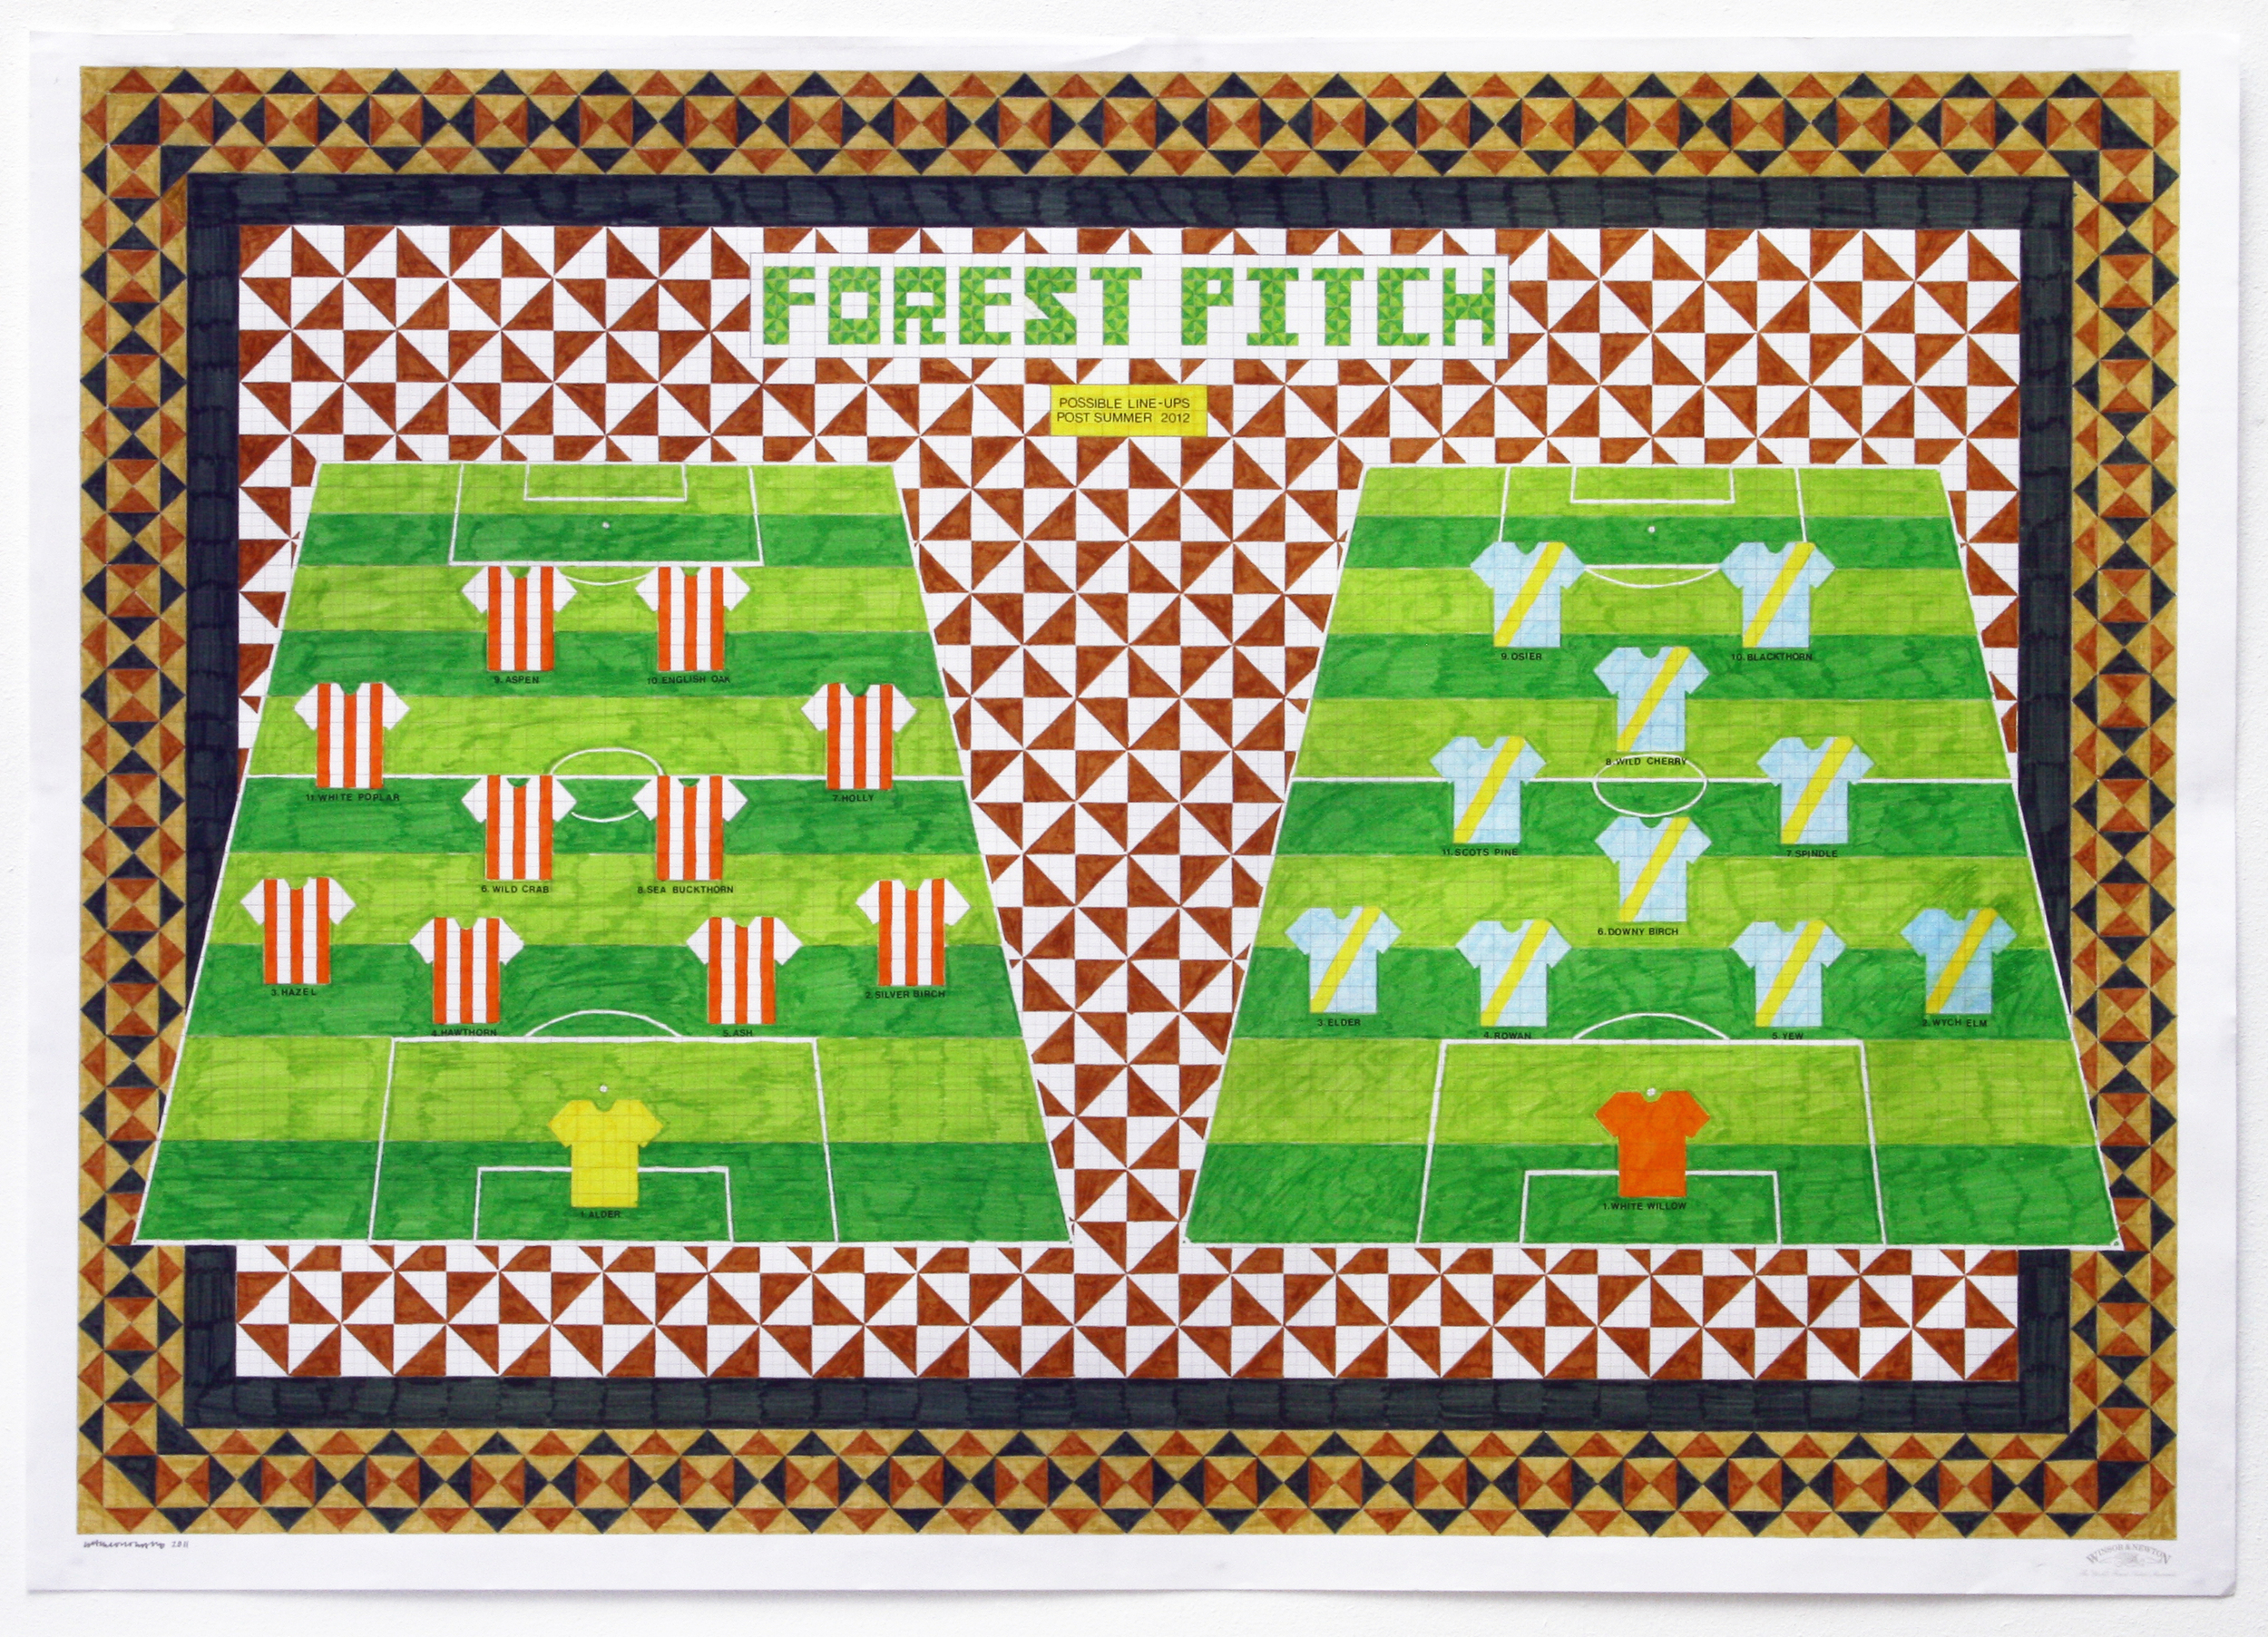 Forest Pitch Formation